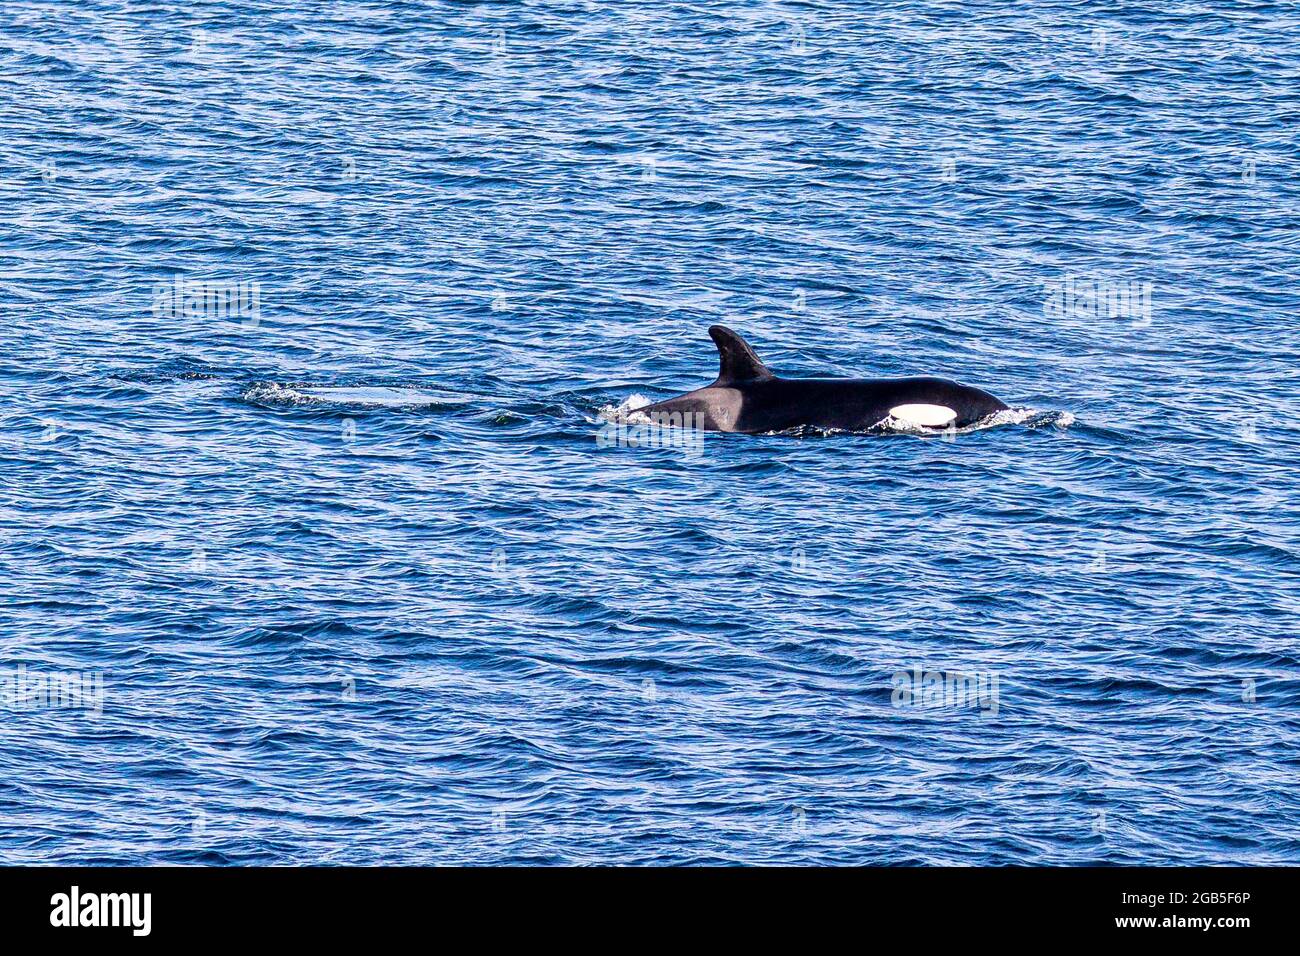 Pack of Orka killer whales hunt in the bay. of Birsay  They catch and eat seals and fish by hunting in a pack circling their prey Stock Photo